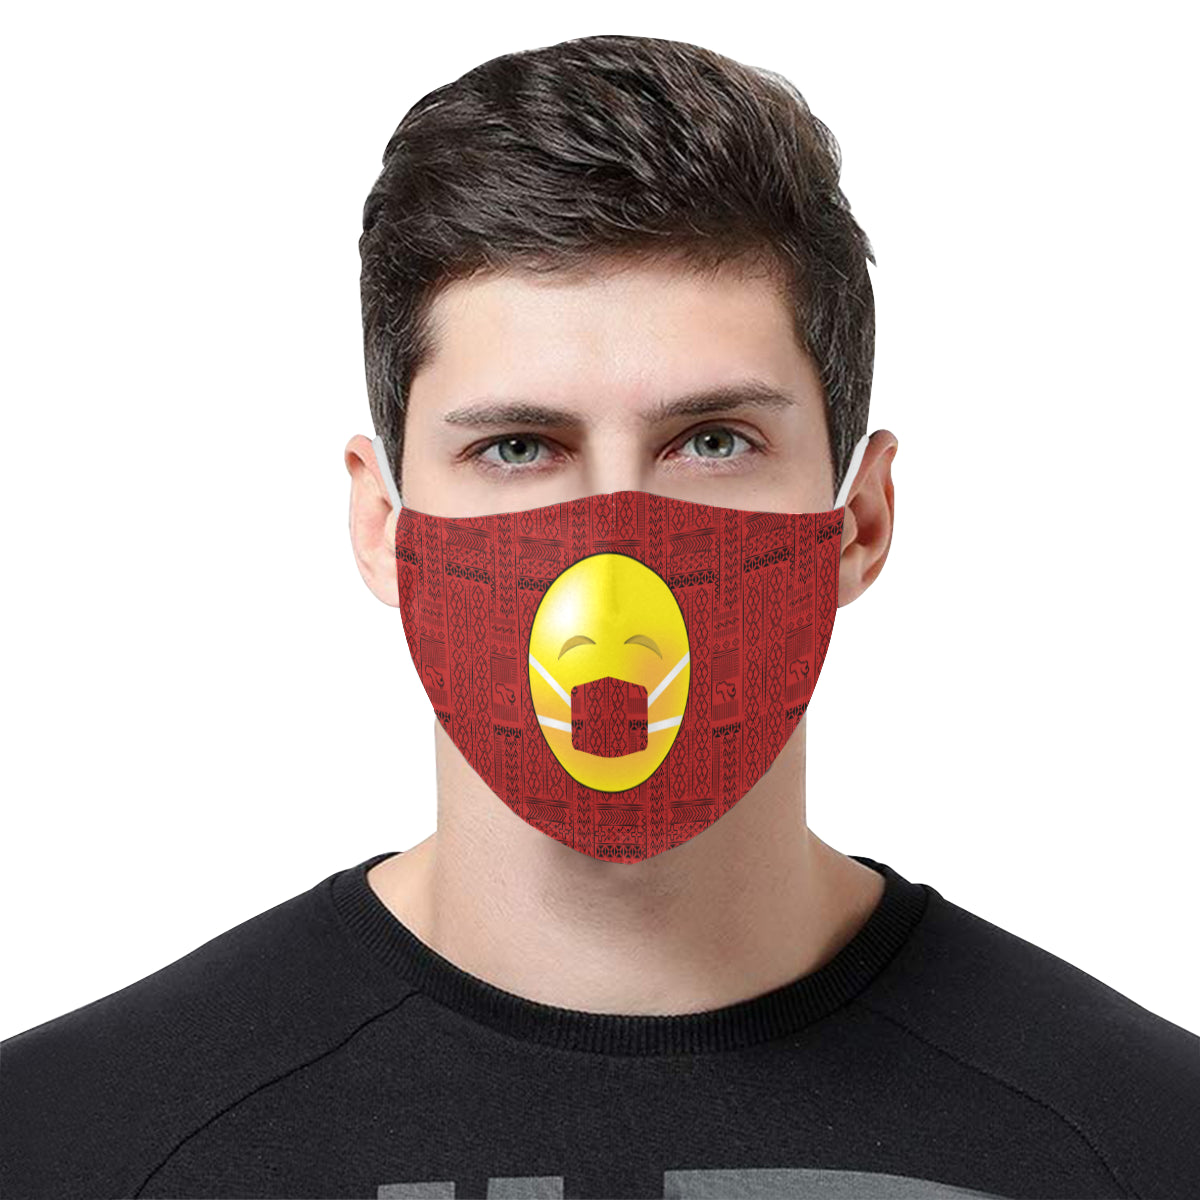 Mask on Tribal Print Emoji Cotton Fabric Face Mask with Filter Slot & Adjustable Strap - Non-medical use (2 Filters Included)